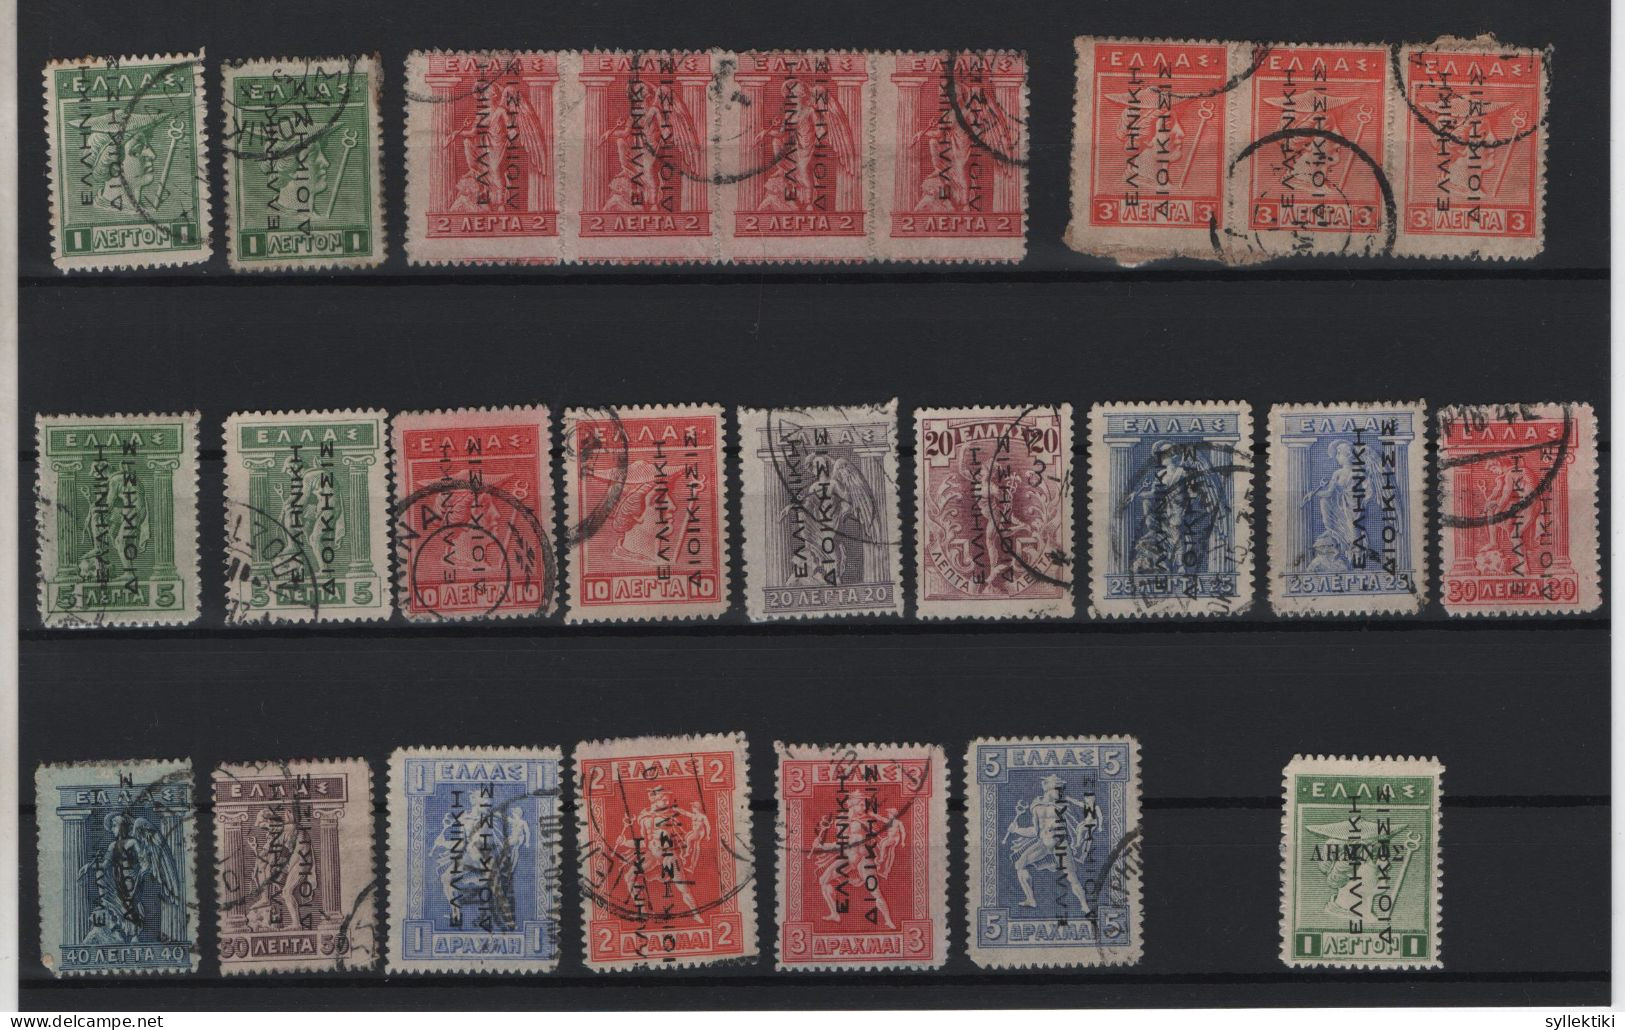 GREECE 1913 GREEK ADMIN READING UP 1 LEPTON - 5 DRACHMAS USED STAMPS (ONE IS MH)   HELLAS No 229 - 248 AND VALUE EURO 16 - Gebraucht